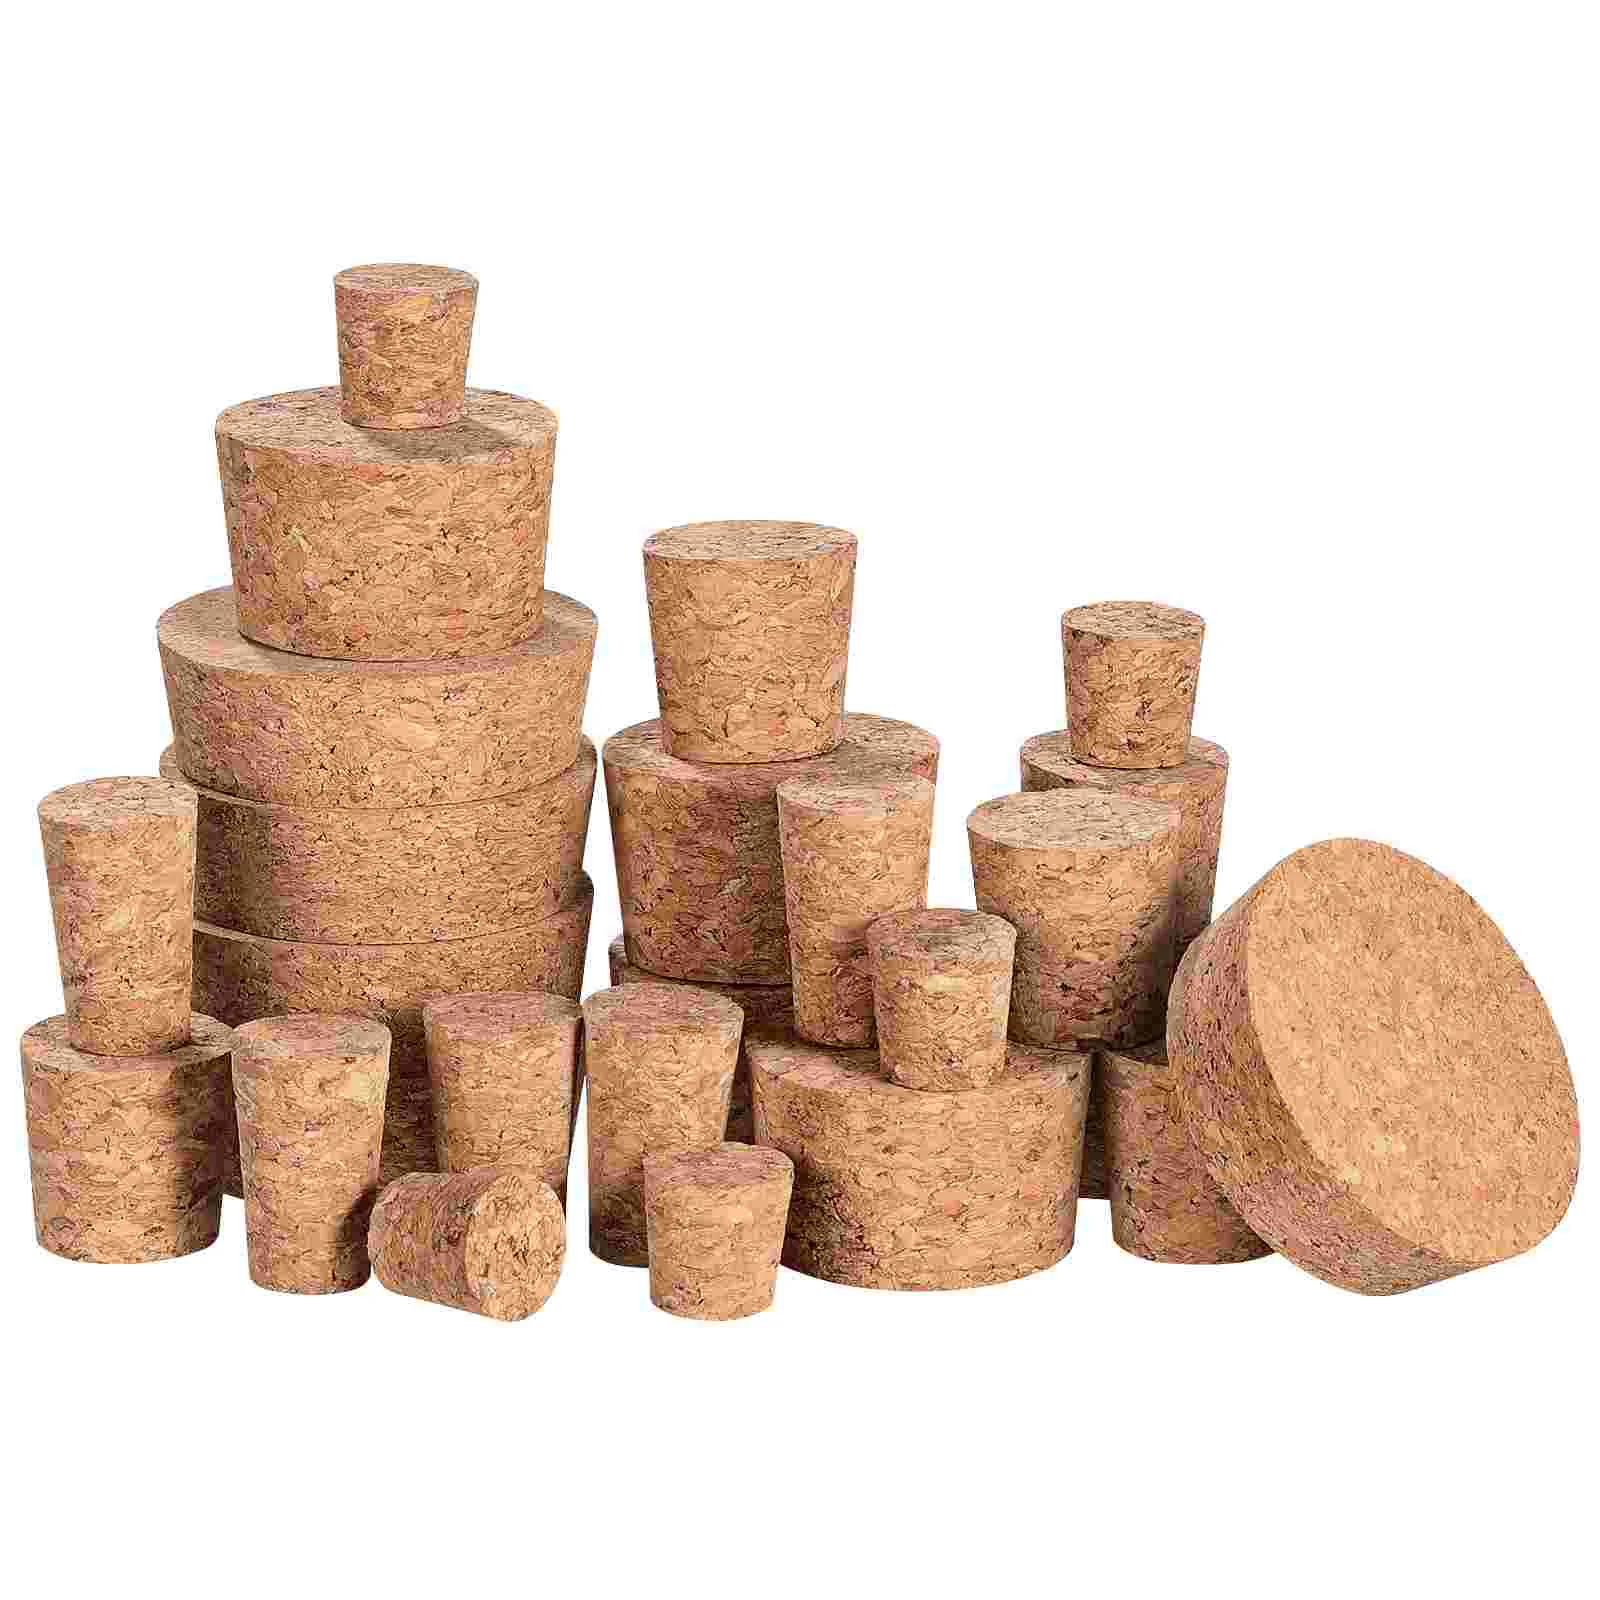 

Cork Tapered Stoppers Plugs Winebottle Restaurant Projects Craft Making Diy Stopper Beer Wood Corks Home Bar Replacement